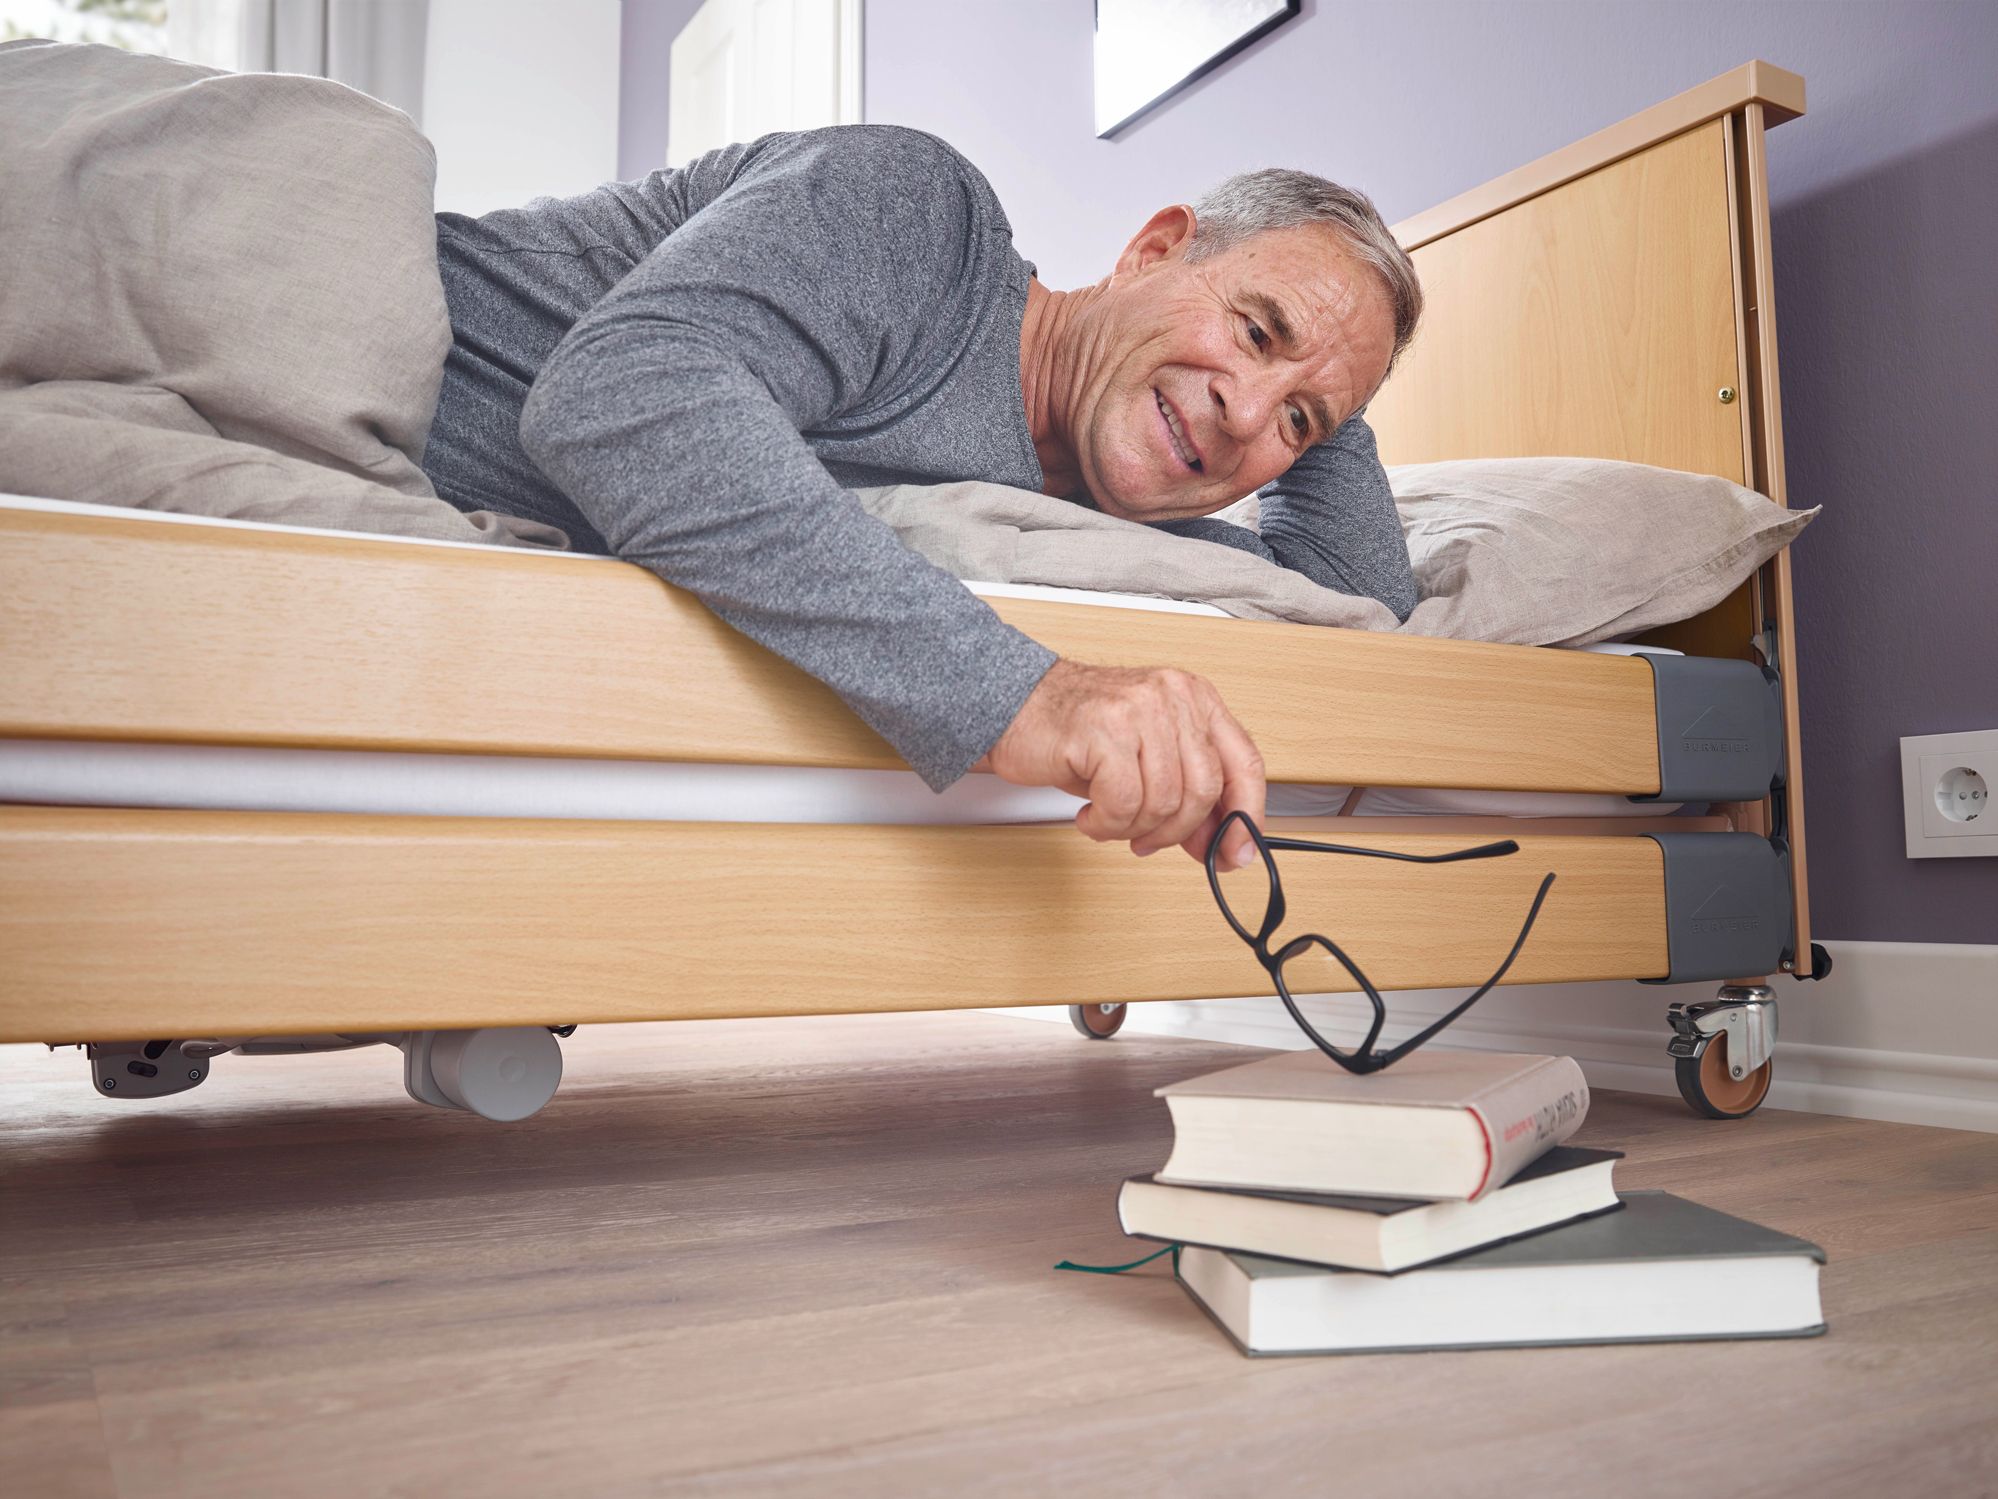 Fall prevention with the Dali low entry low-height bed